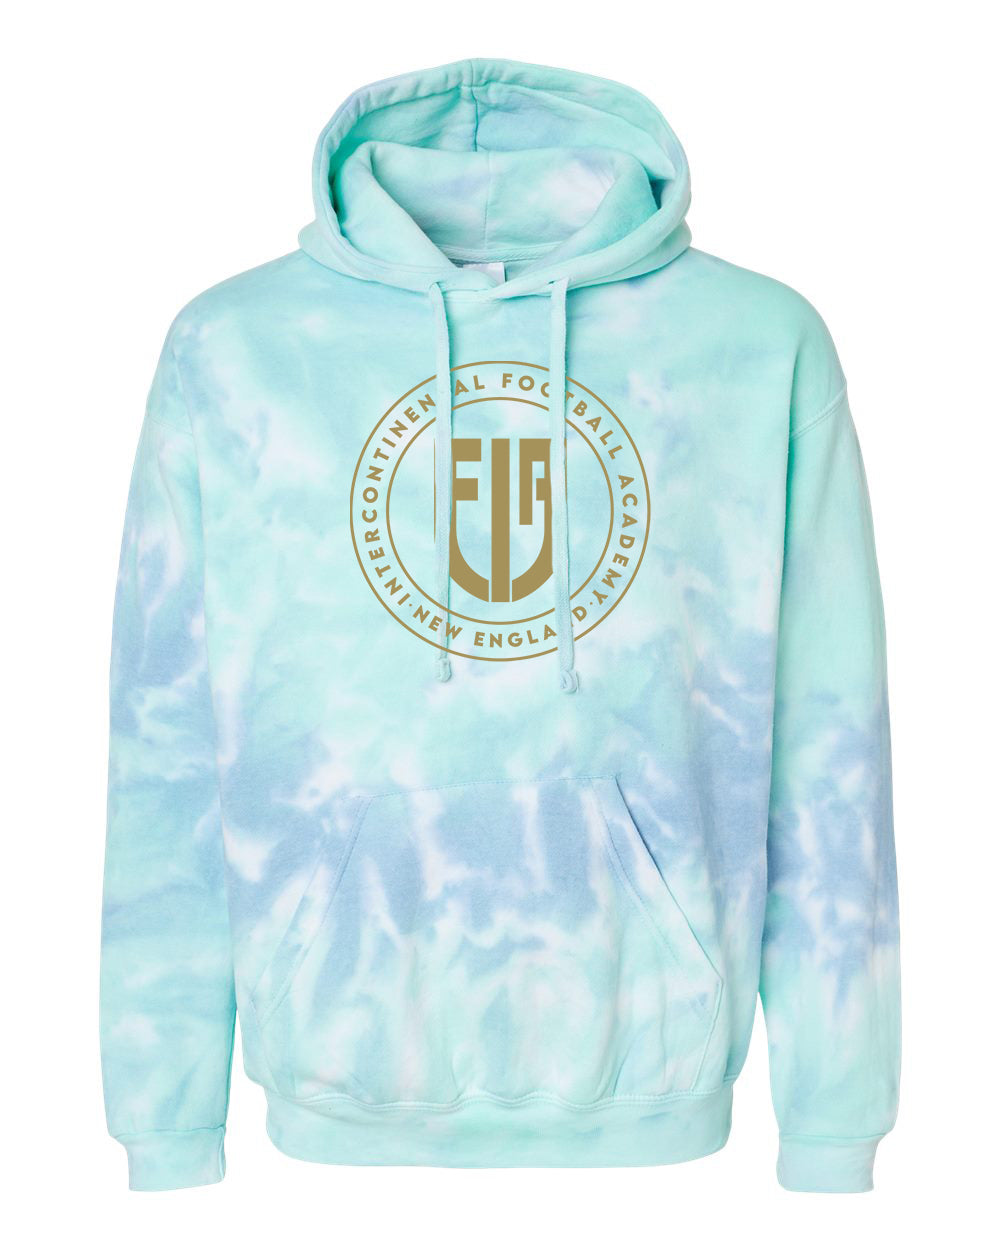 IFA Adult Tie-Dye "Classic" - 8777 (color options available)